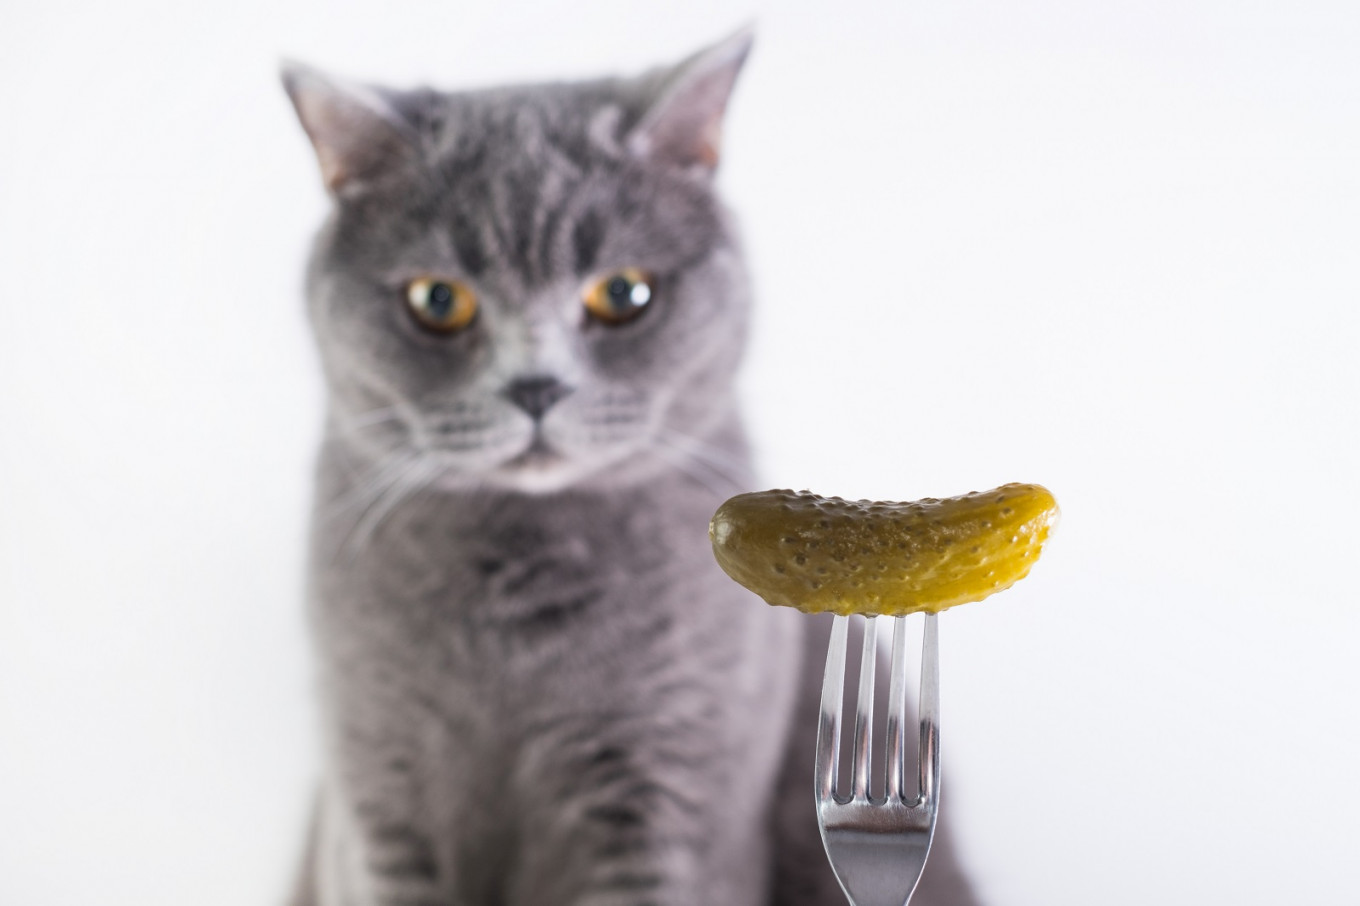 So why are cats scared of cucumbers 